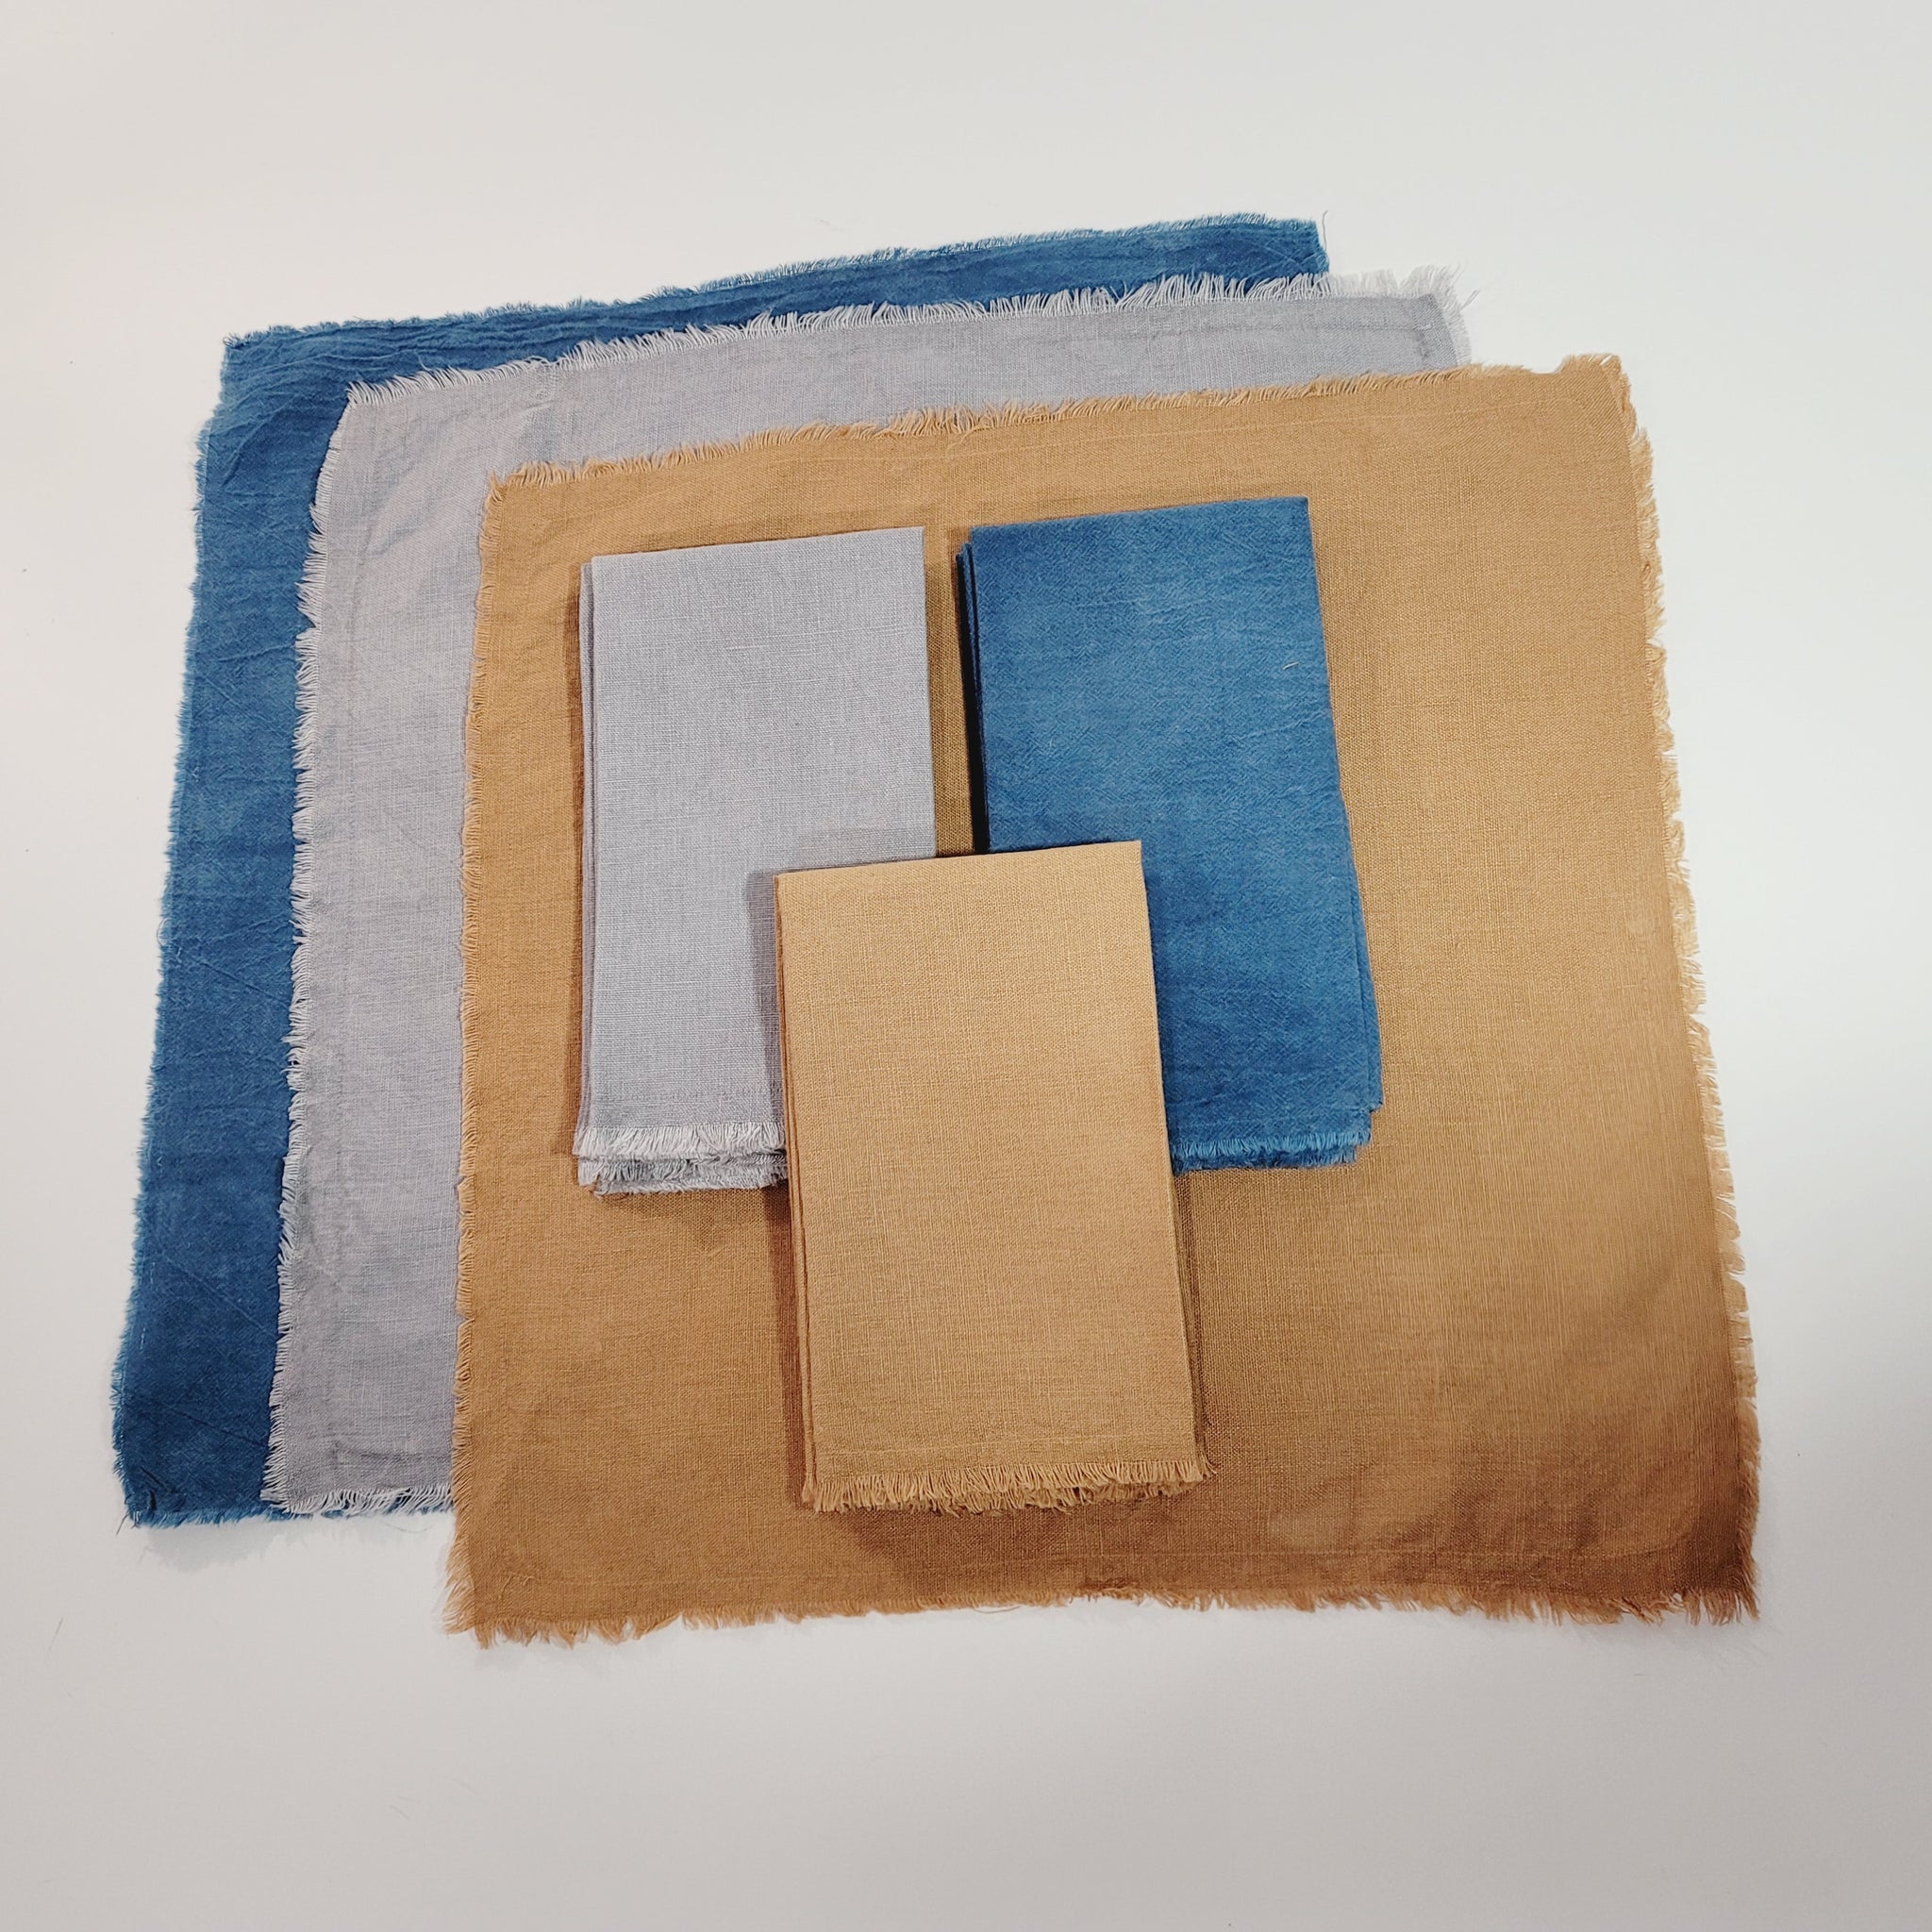 Naturally Dyed Linen Napkins (s/4)